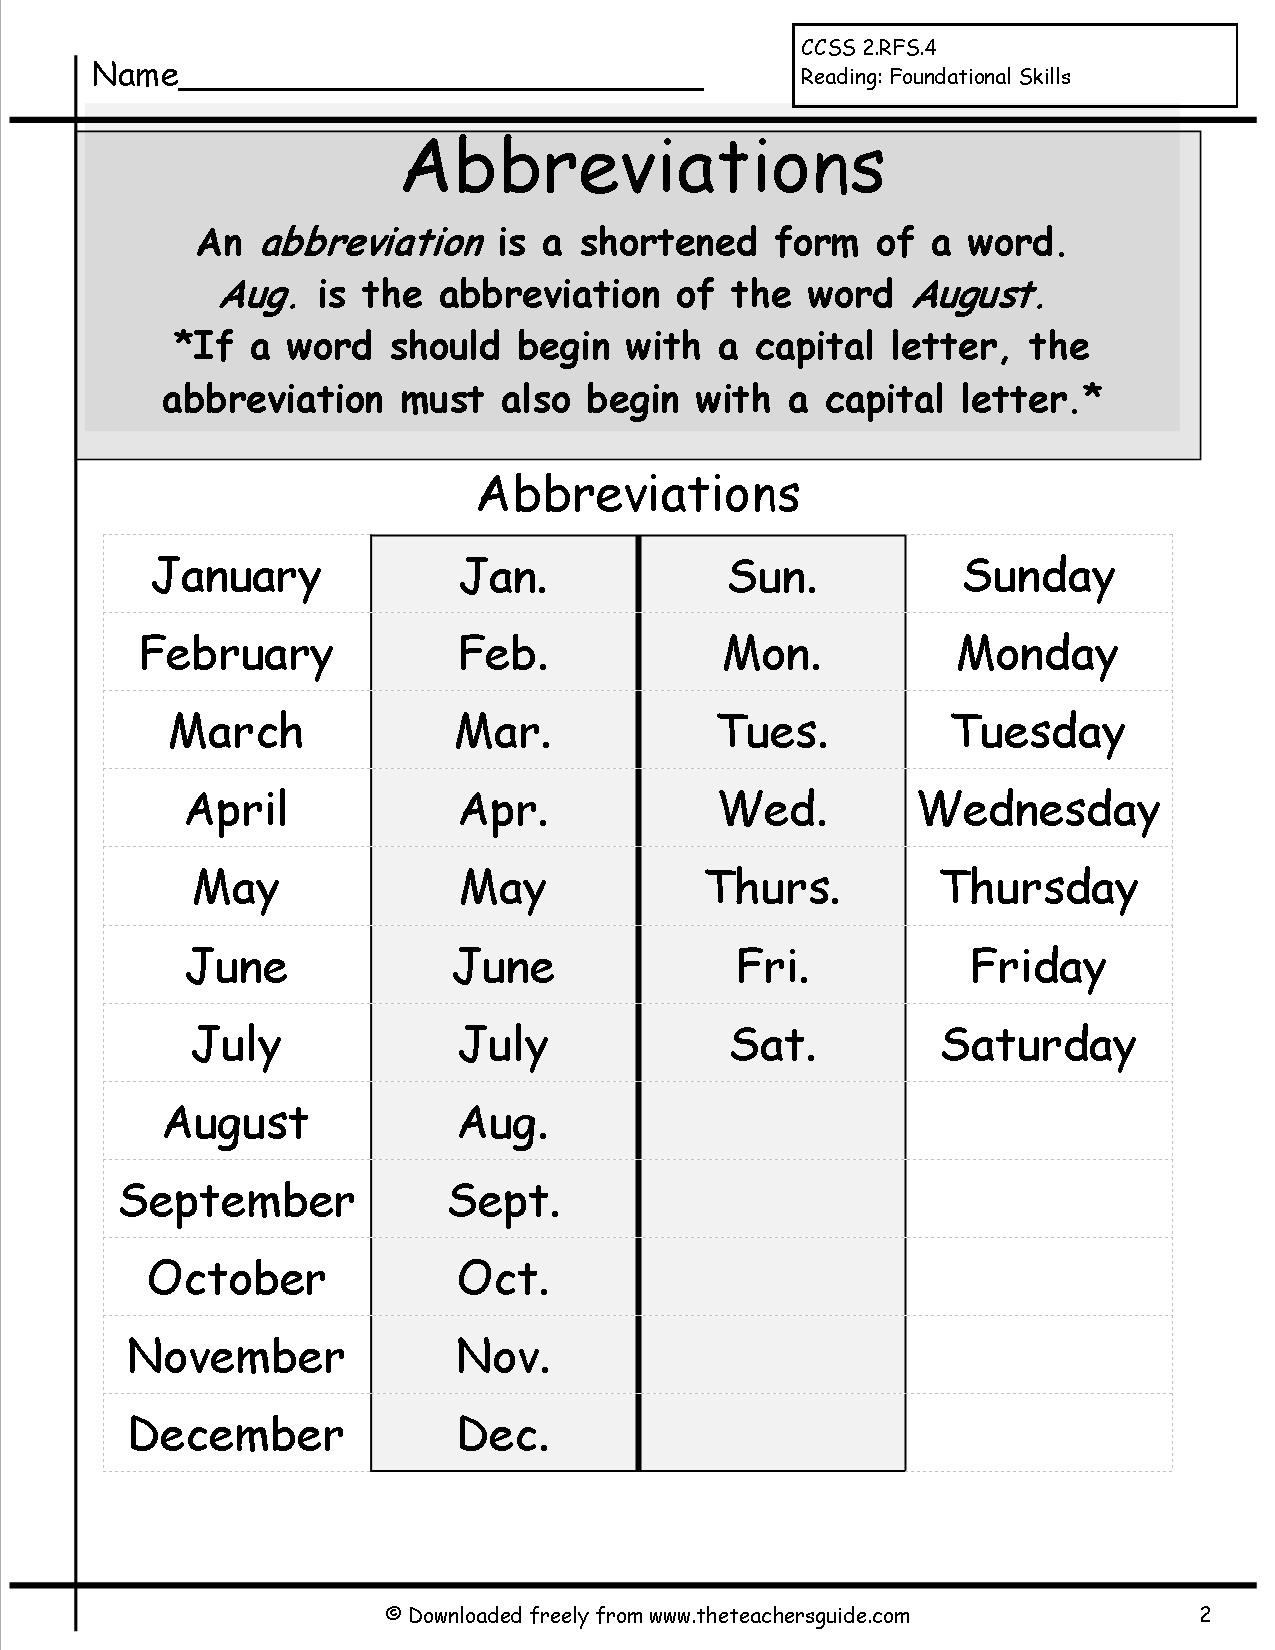 Abbreviations Worksheets From The Teacher&#039;s Guide in July-December Writing Months Of The Year Worksheet